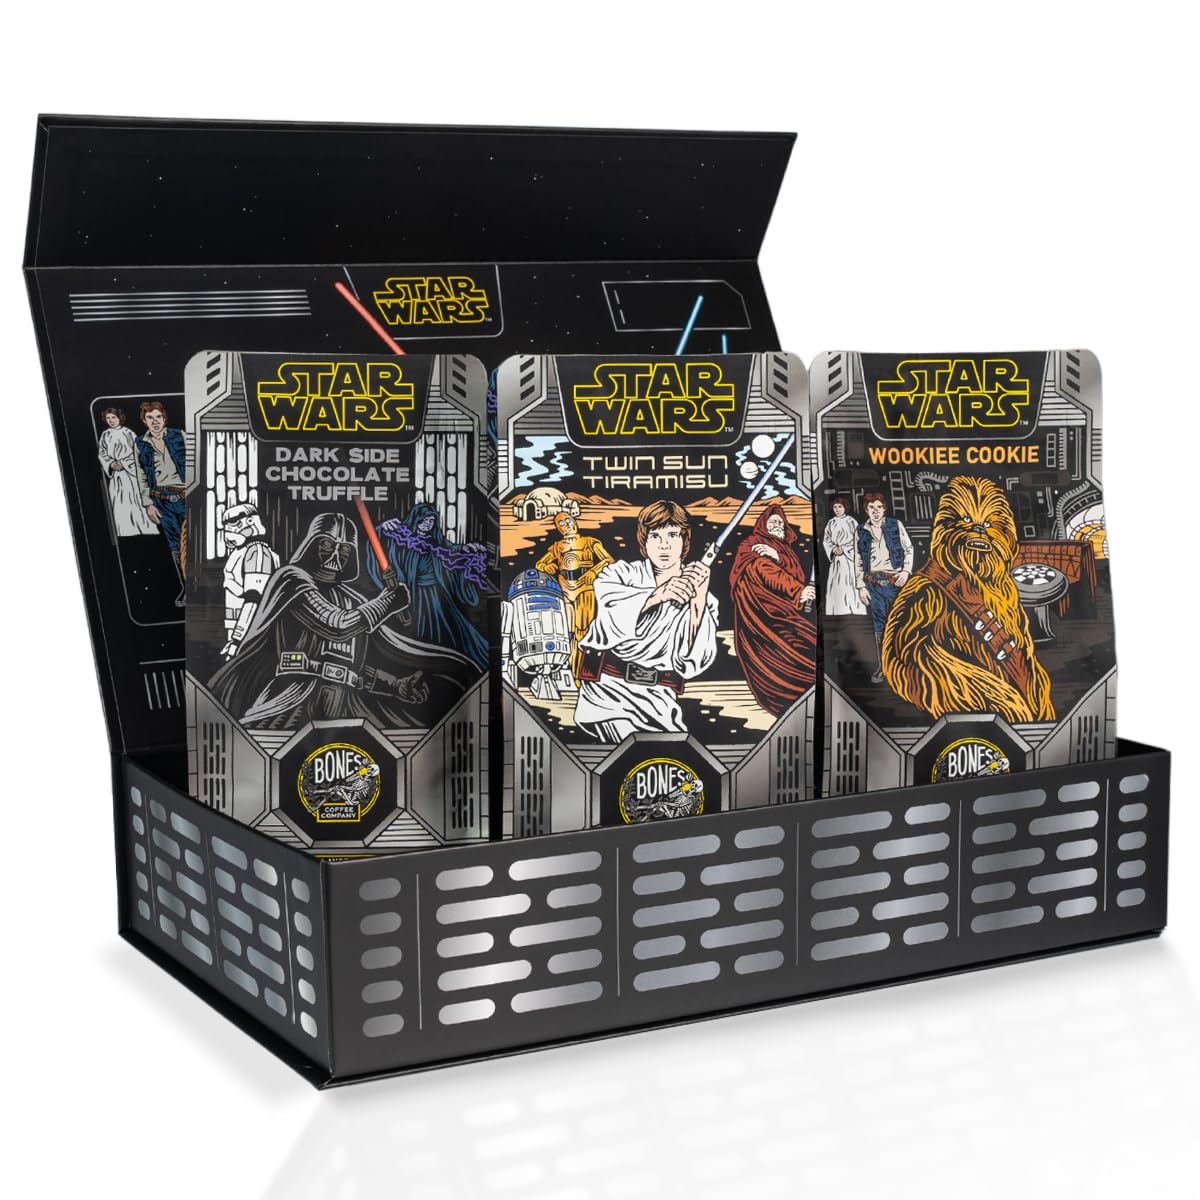 Bones Coffee Company Star Wars Collector's Box Ground Coffee Beans | 12 oz Sample Pack of 3 Low Acid Medium Roast Gourmet Flavored Coffee Gifts Inspired by Star Wars (Ground)